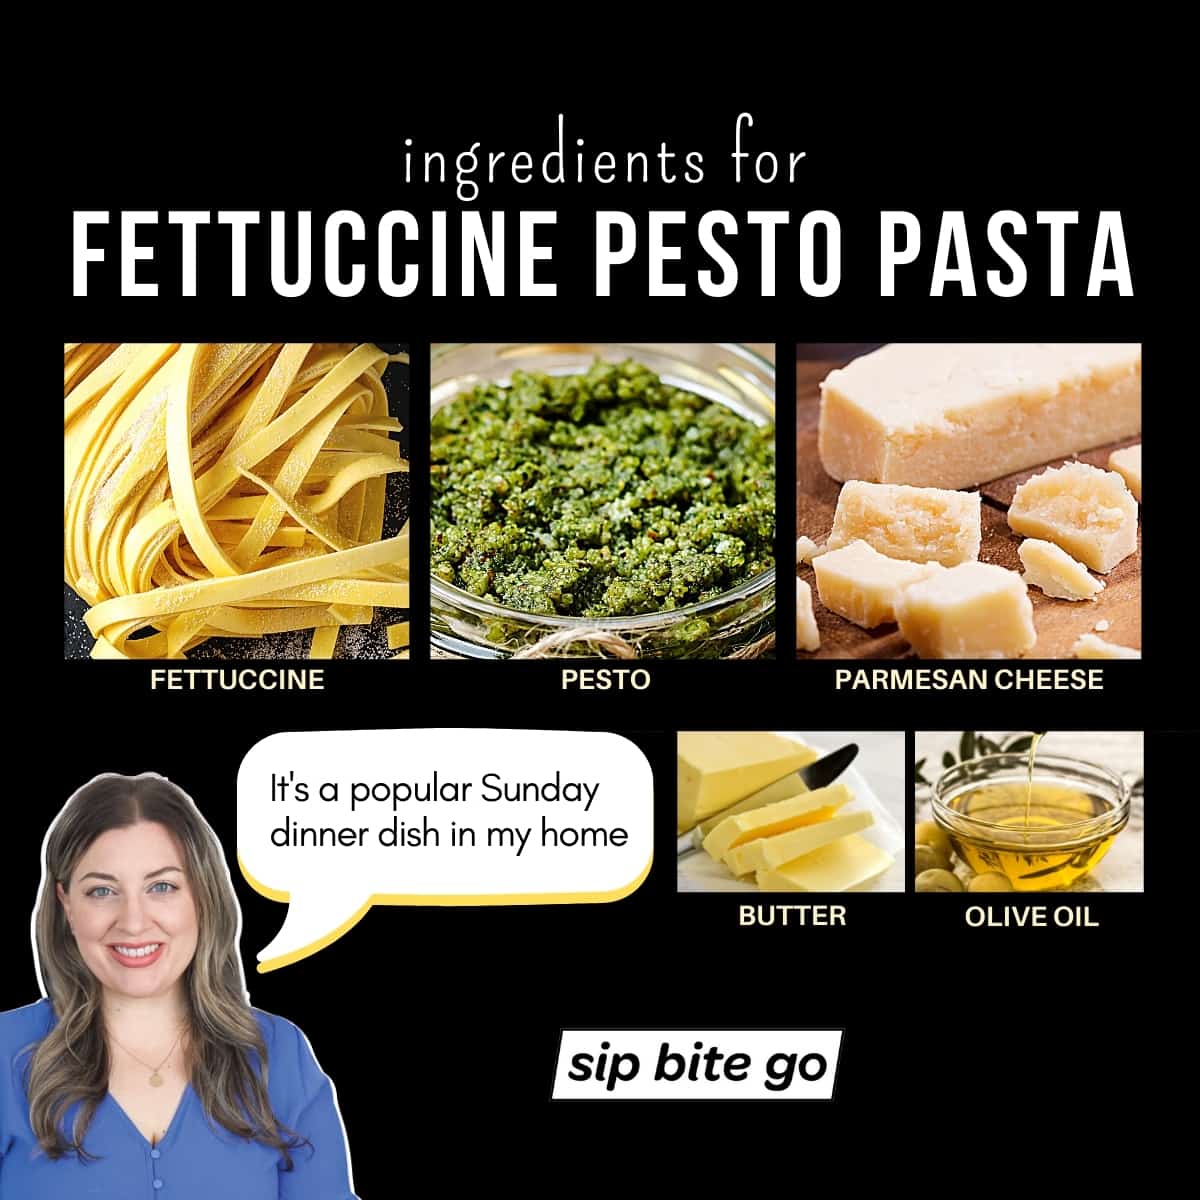 Infographic chart for ingredients for Fettuccine Pesto pasta with captions Sip Bite Go